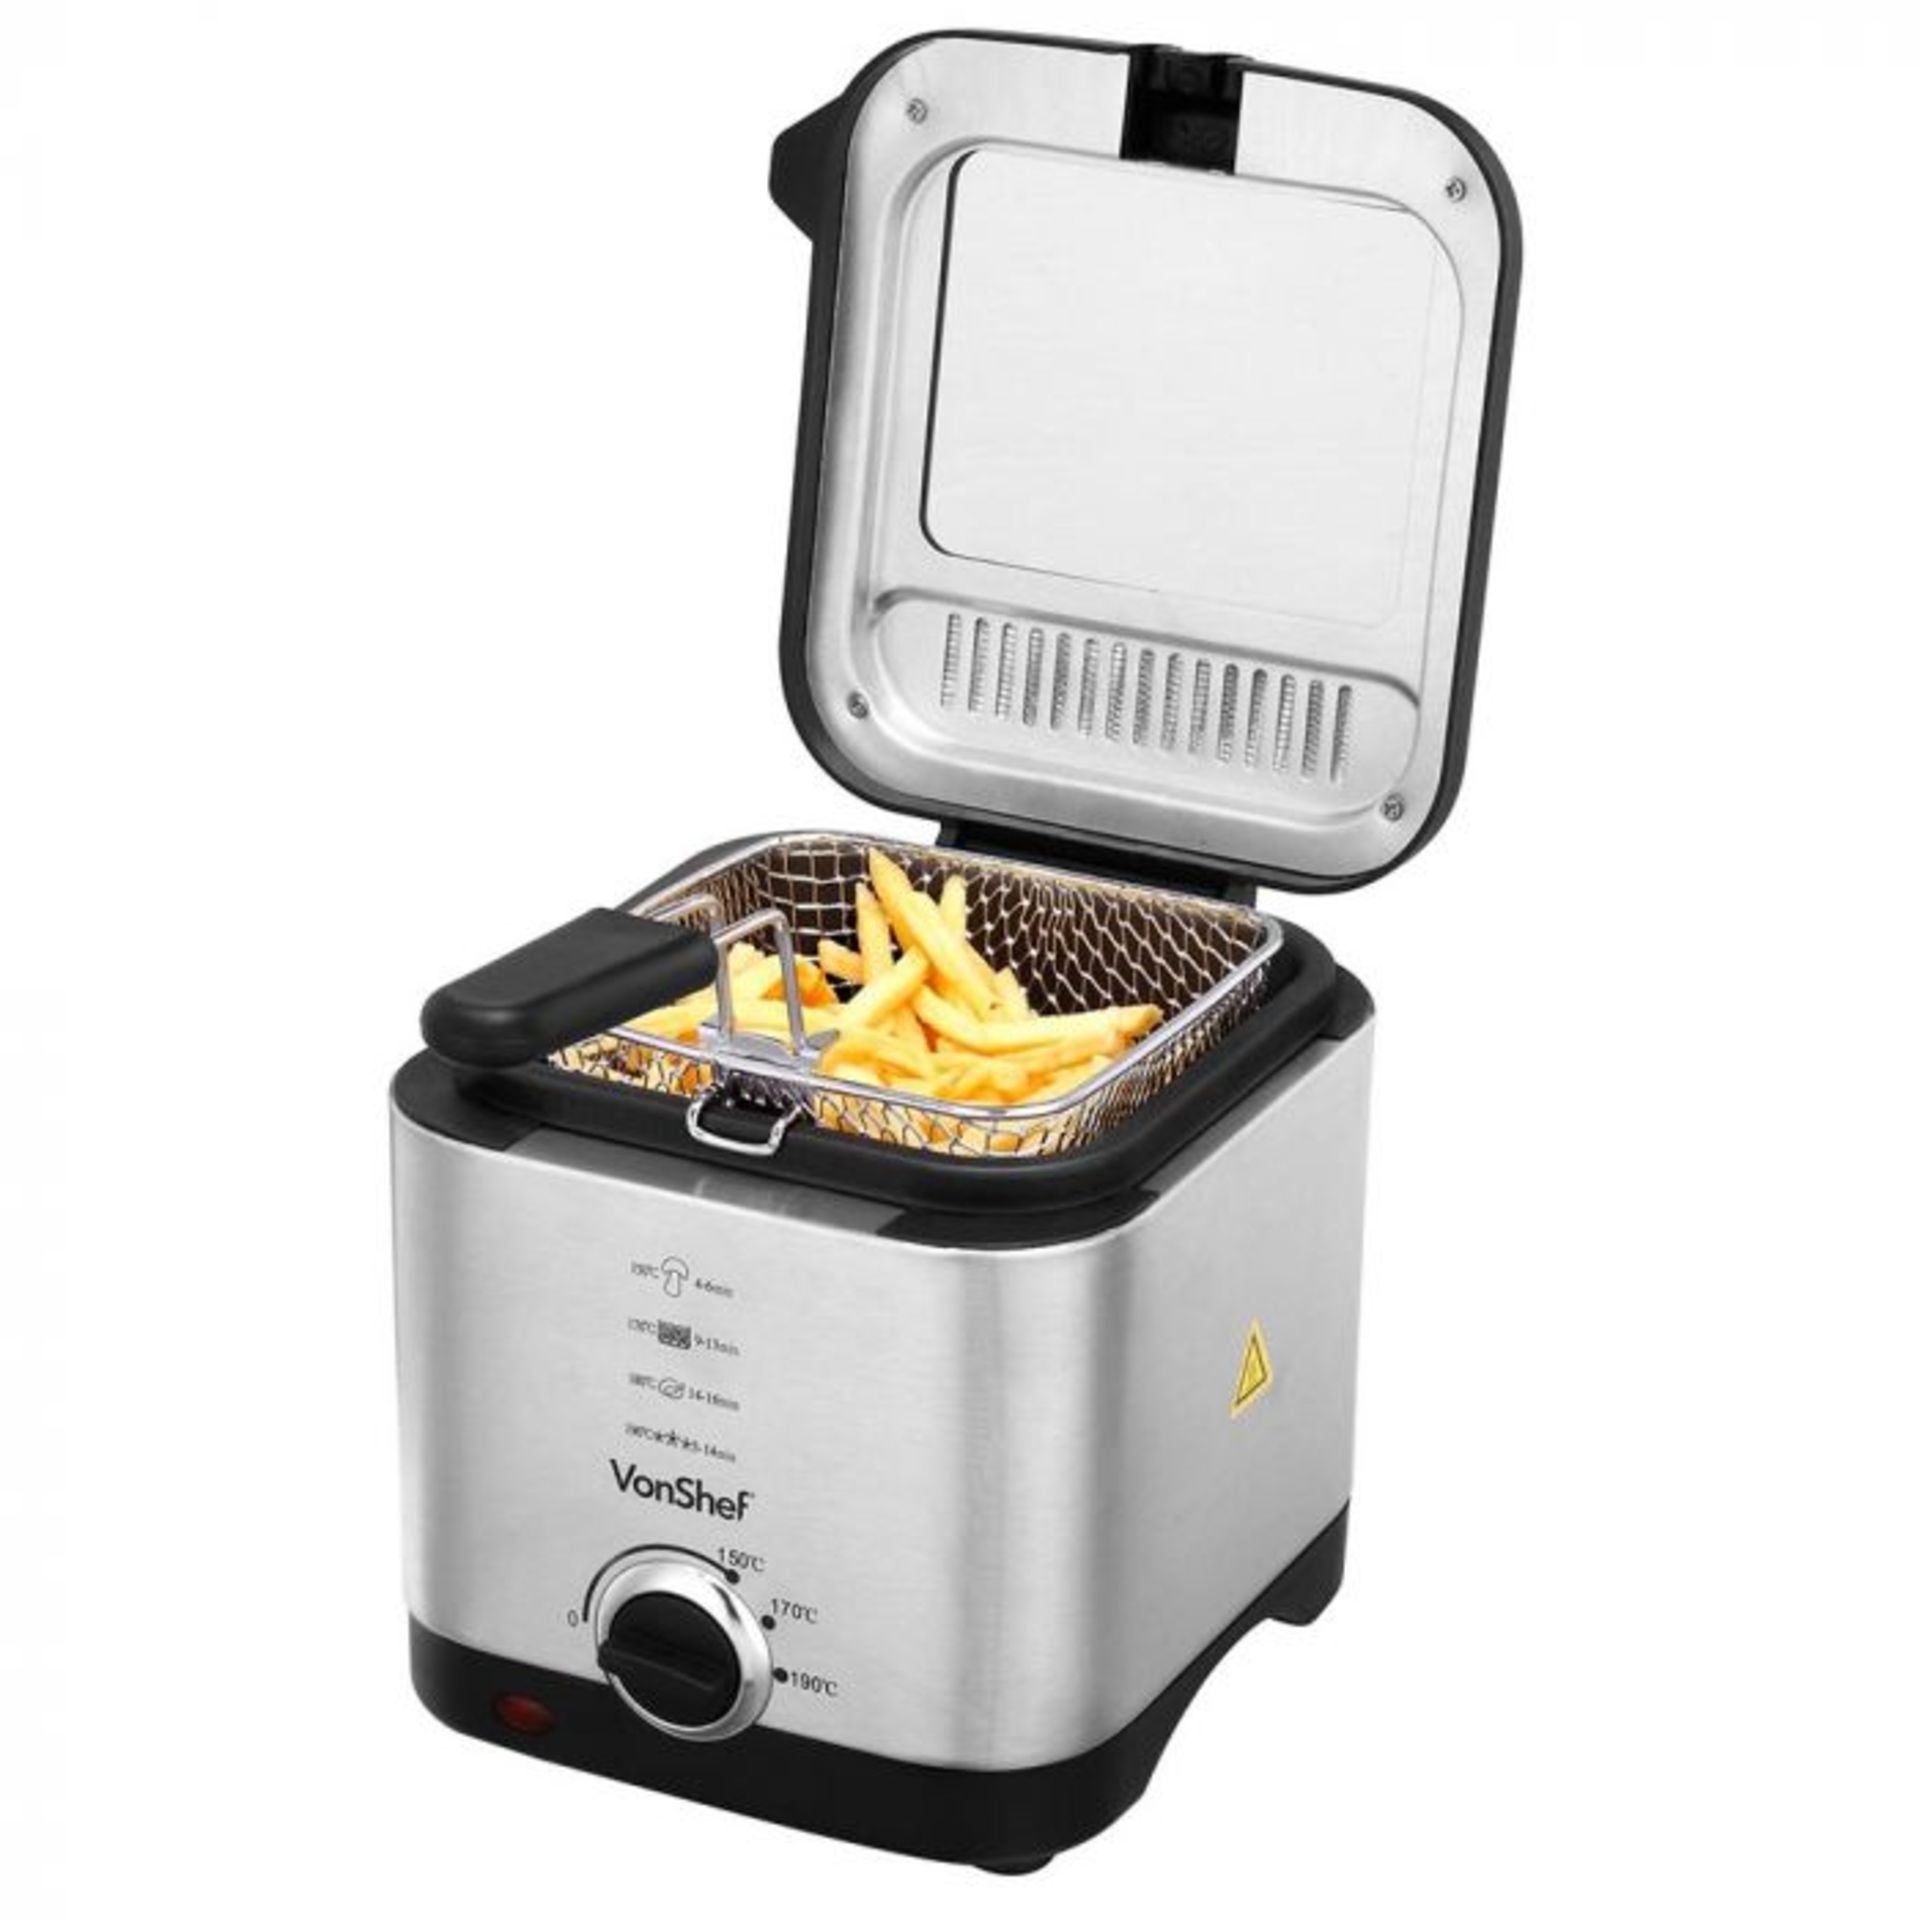 (S352) 1.5L Deep Fat Fryer Versatile 1.5 L capacity deep fat fryer from VonShef - perfect for ... - Image 4 of 4